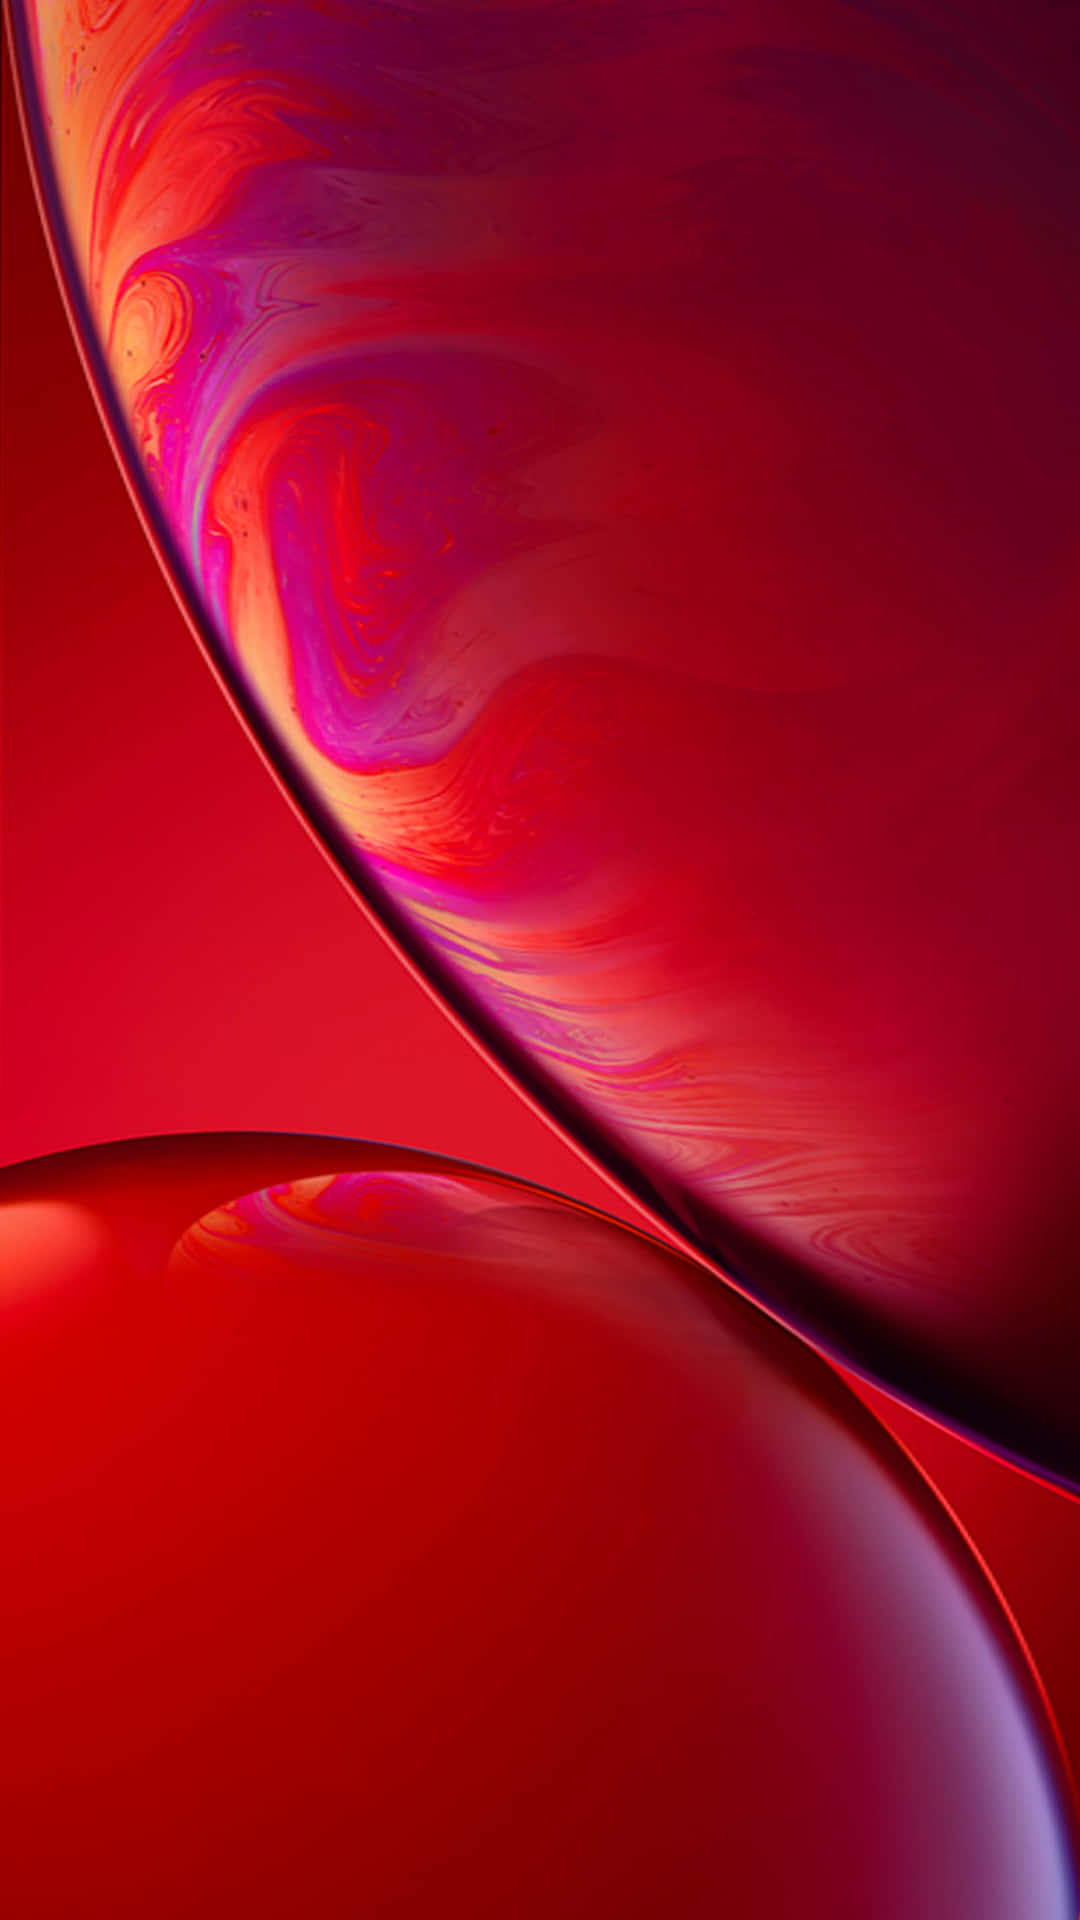 A first look at the sleek design of the iPhone XR. Wallpaper